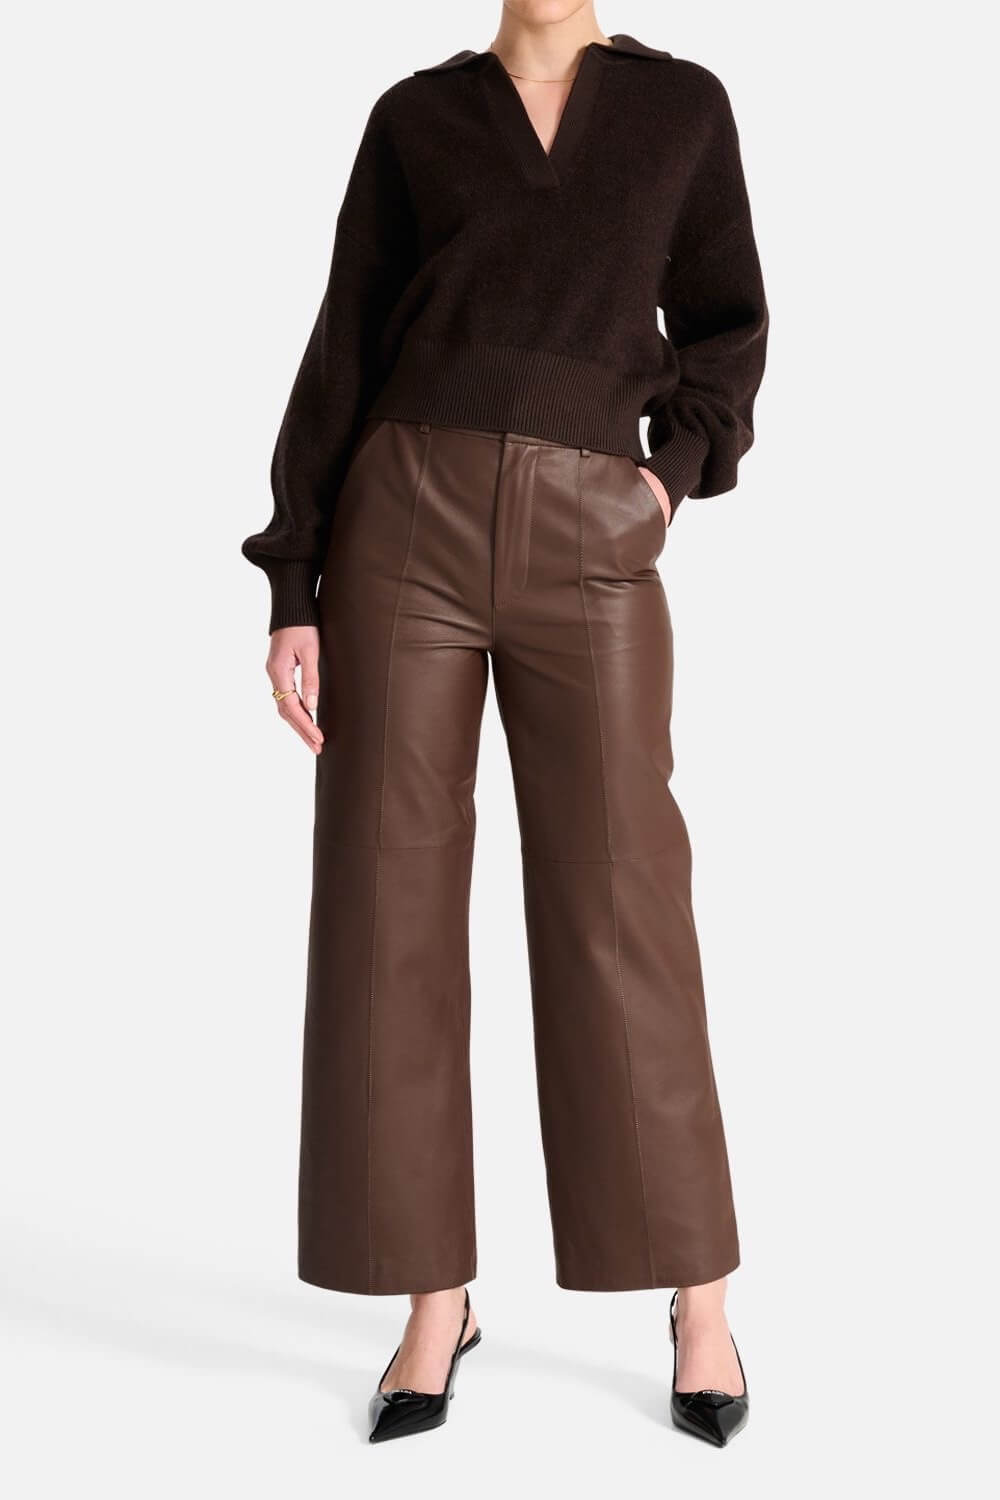 Ena Pelly Stanford Leather Pant | Seal Brown